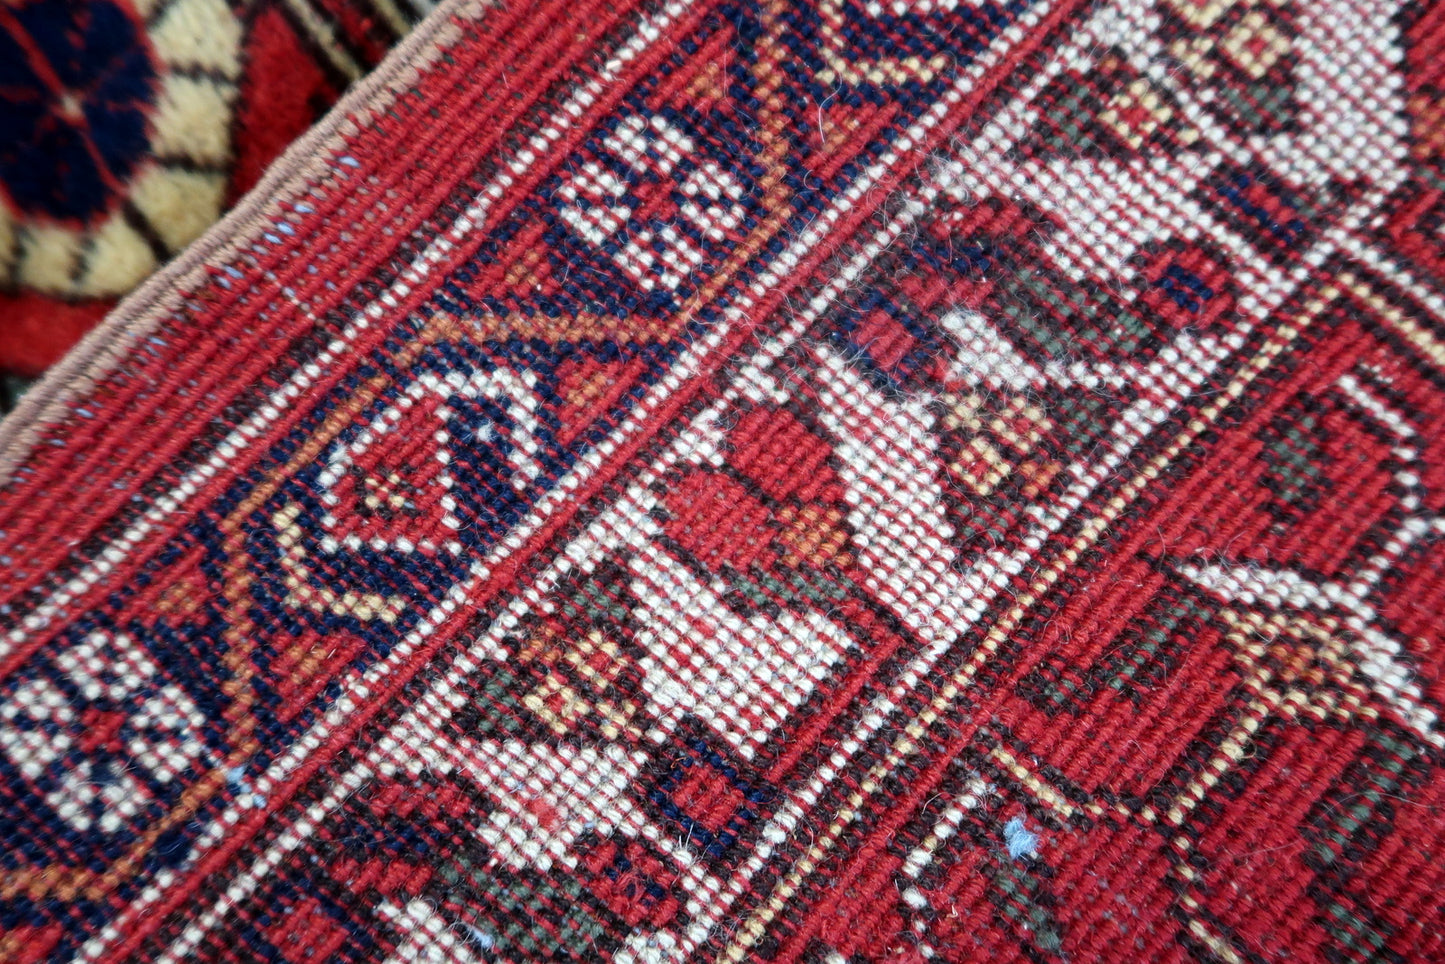 Back view of the vintage Persian style Afshar rug highlighting its craftsmanship and size